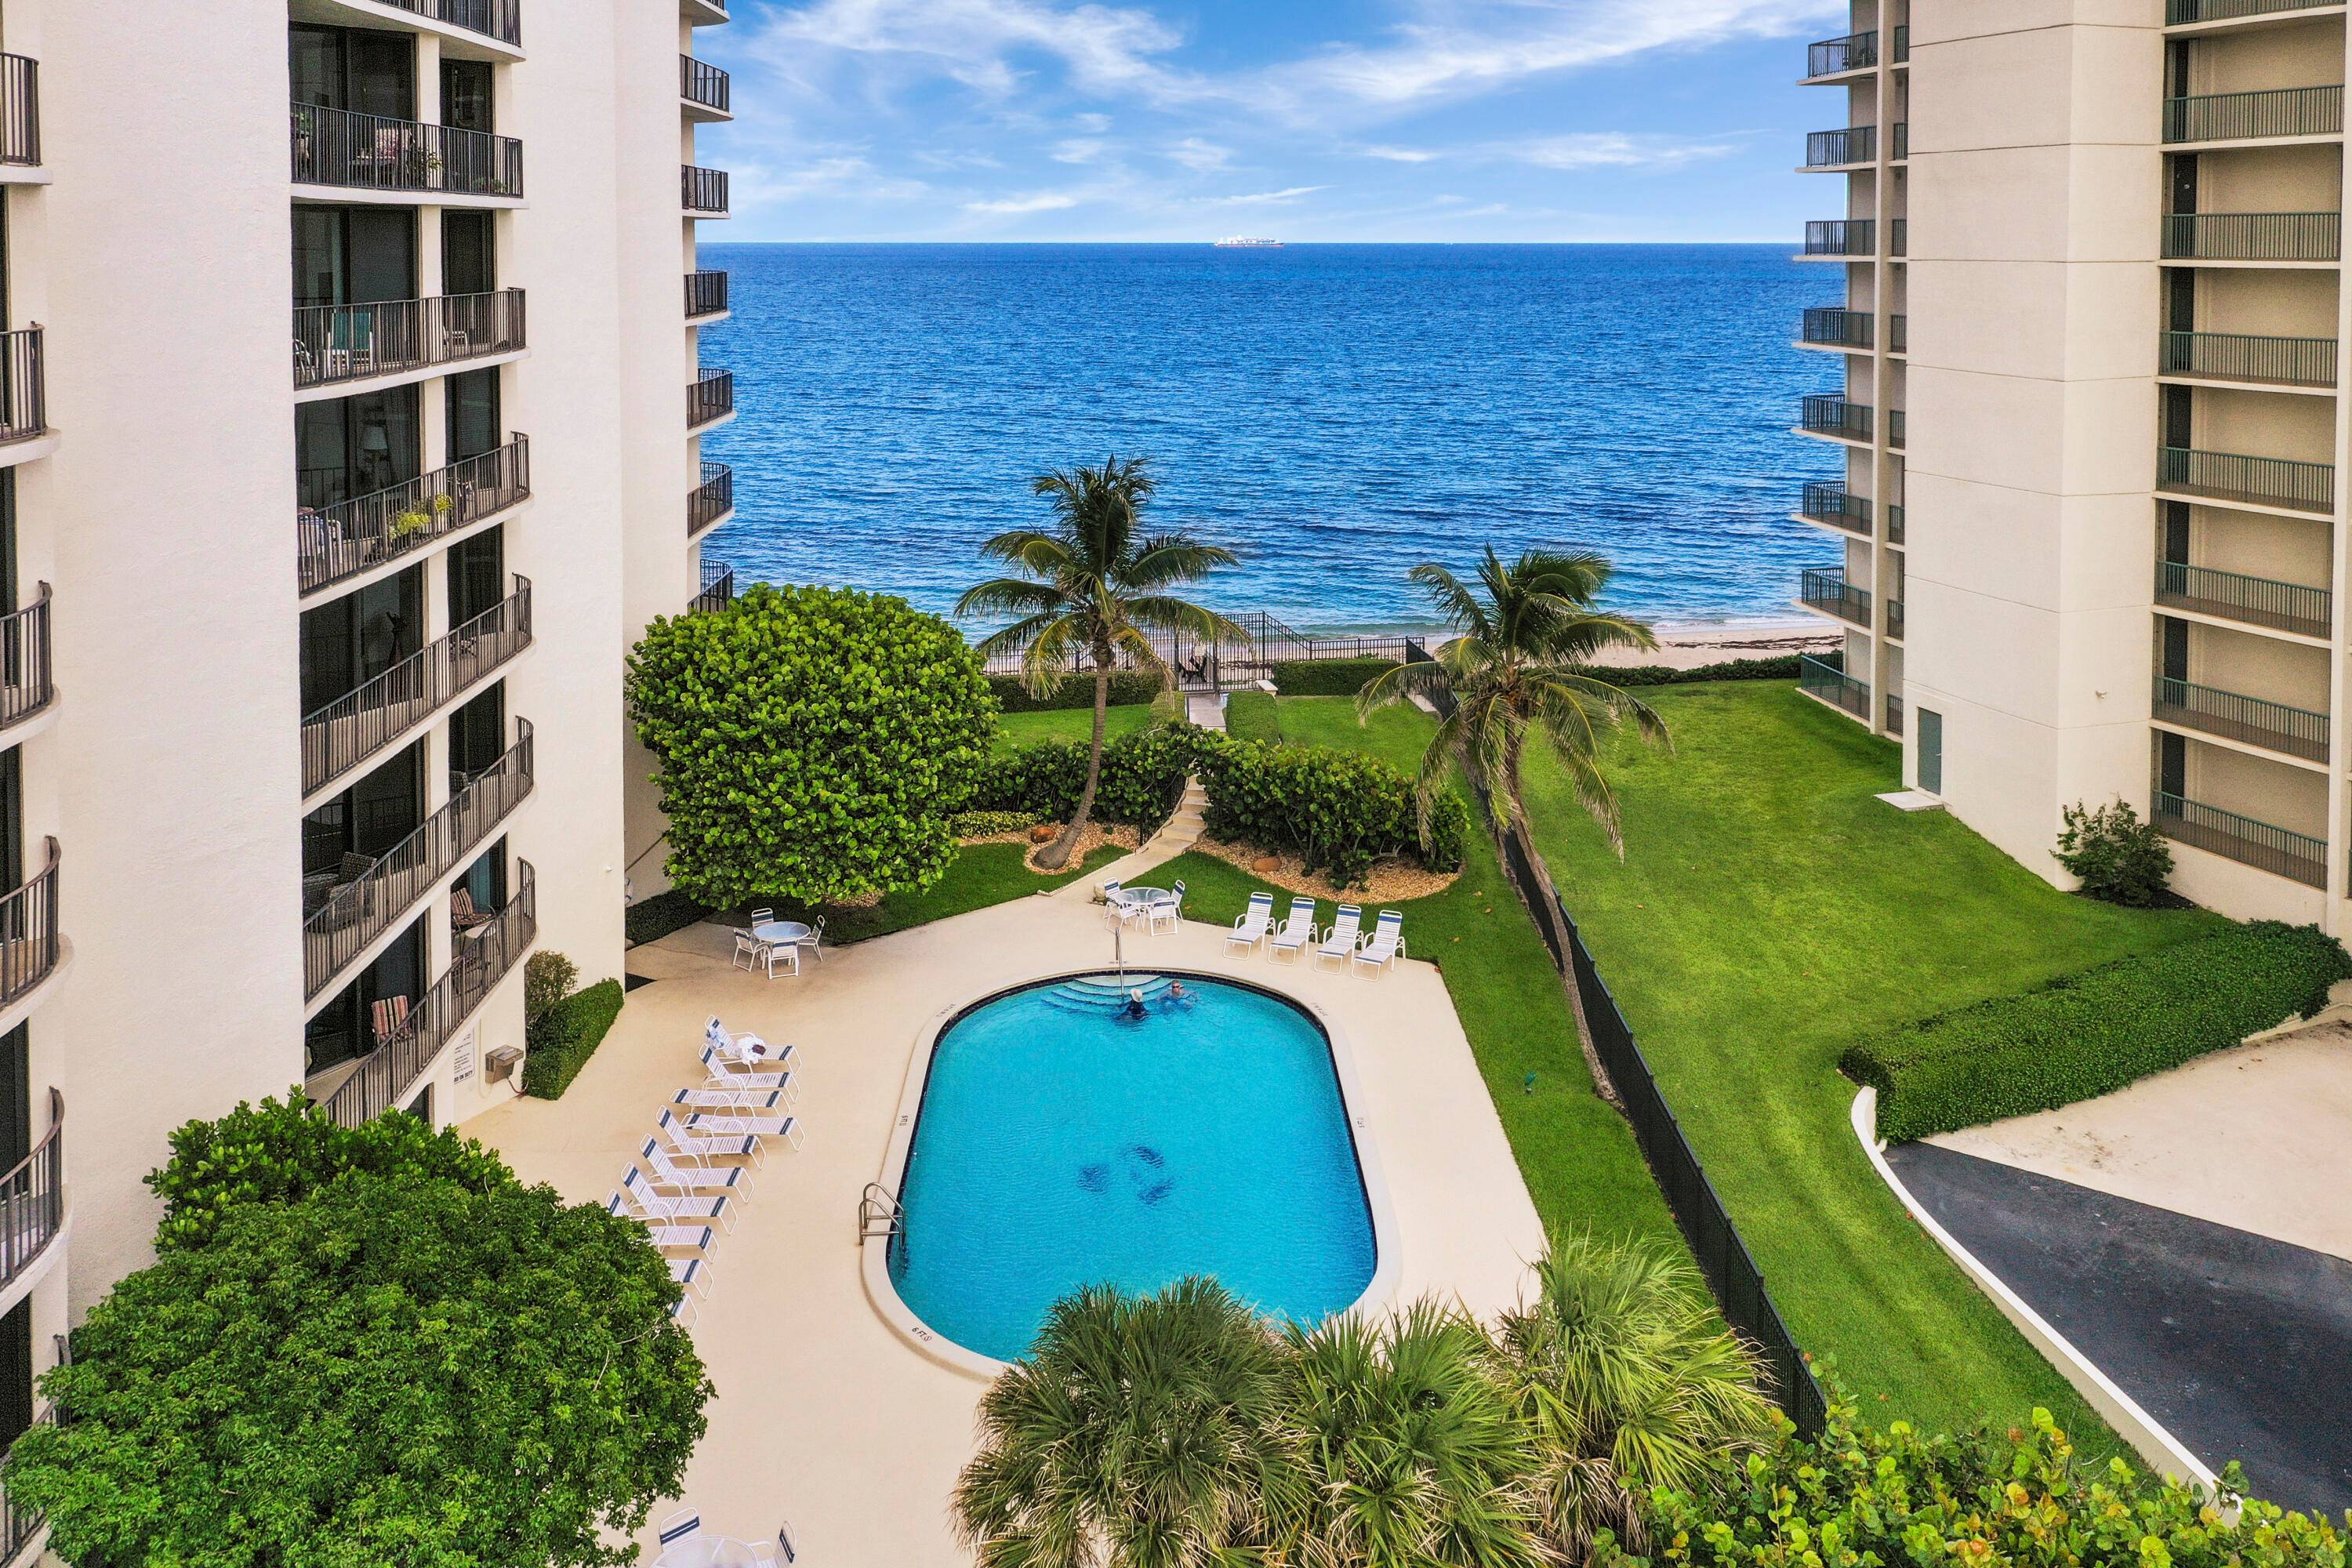 Seasonal rental. Spacious open concept corner condo with stunning views of the ocean and intracoastal.